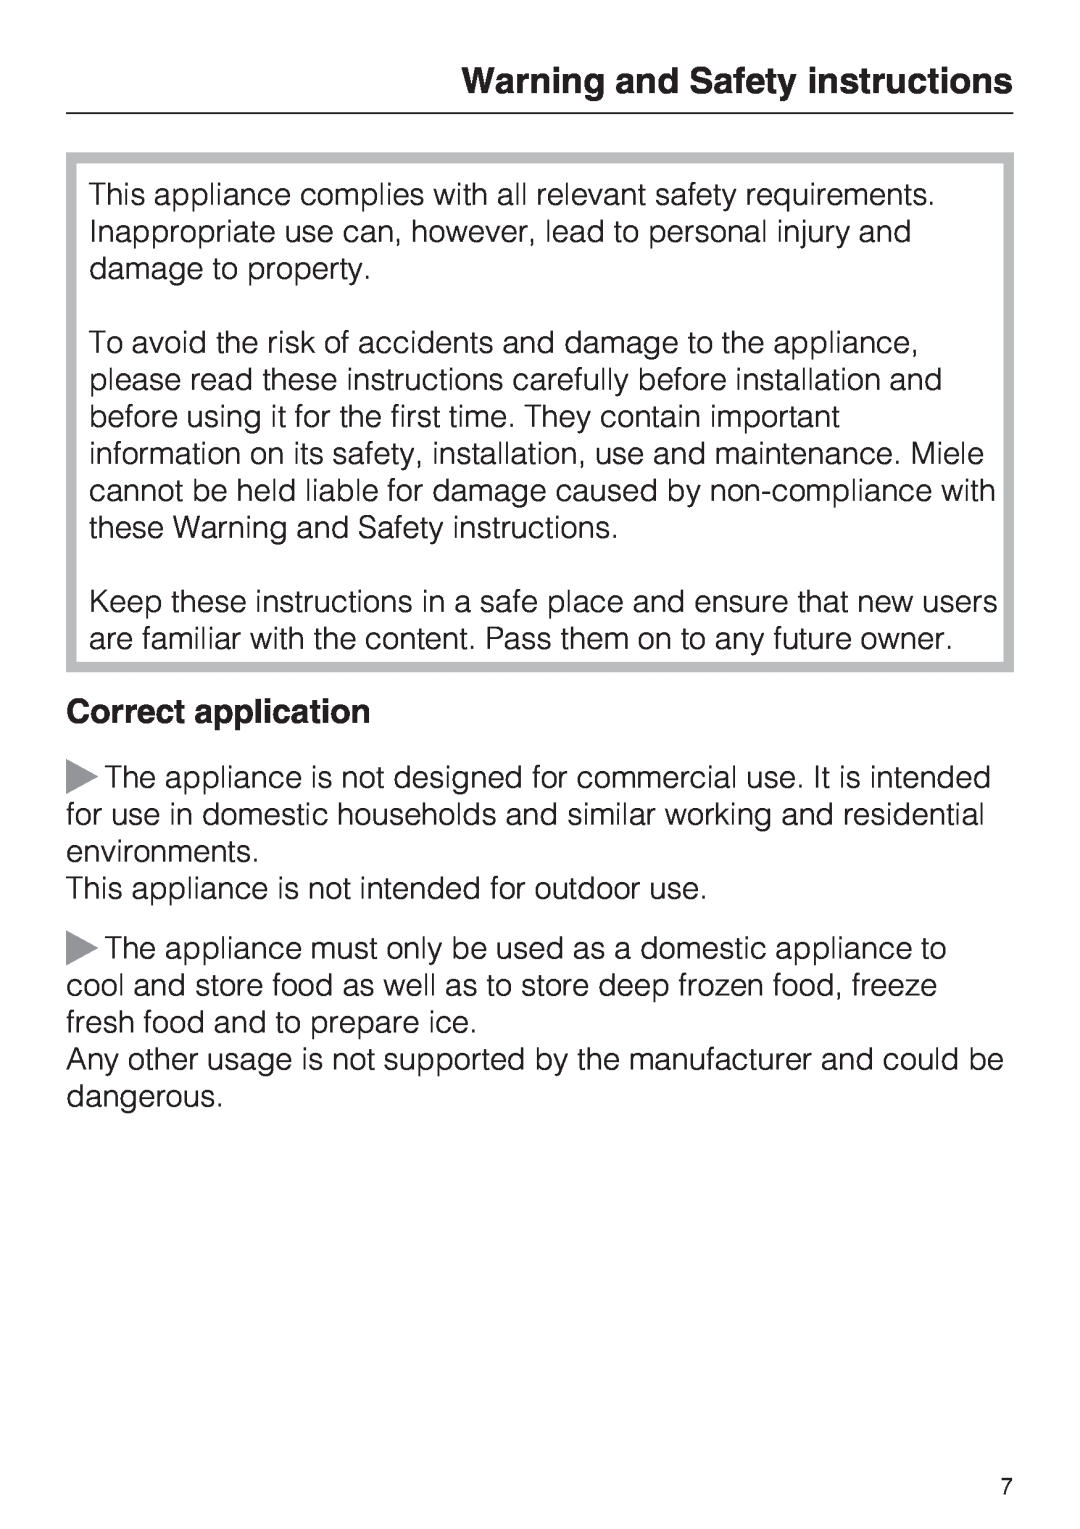 Miele KDN 12623 S-1/-2 installation instructions Warning and Safety instructions, Correct application 